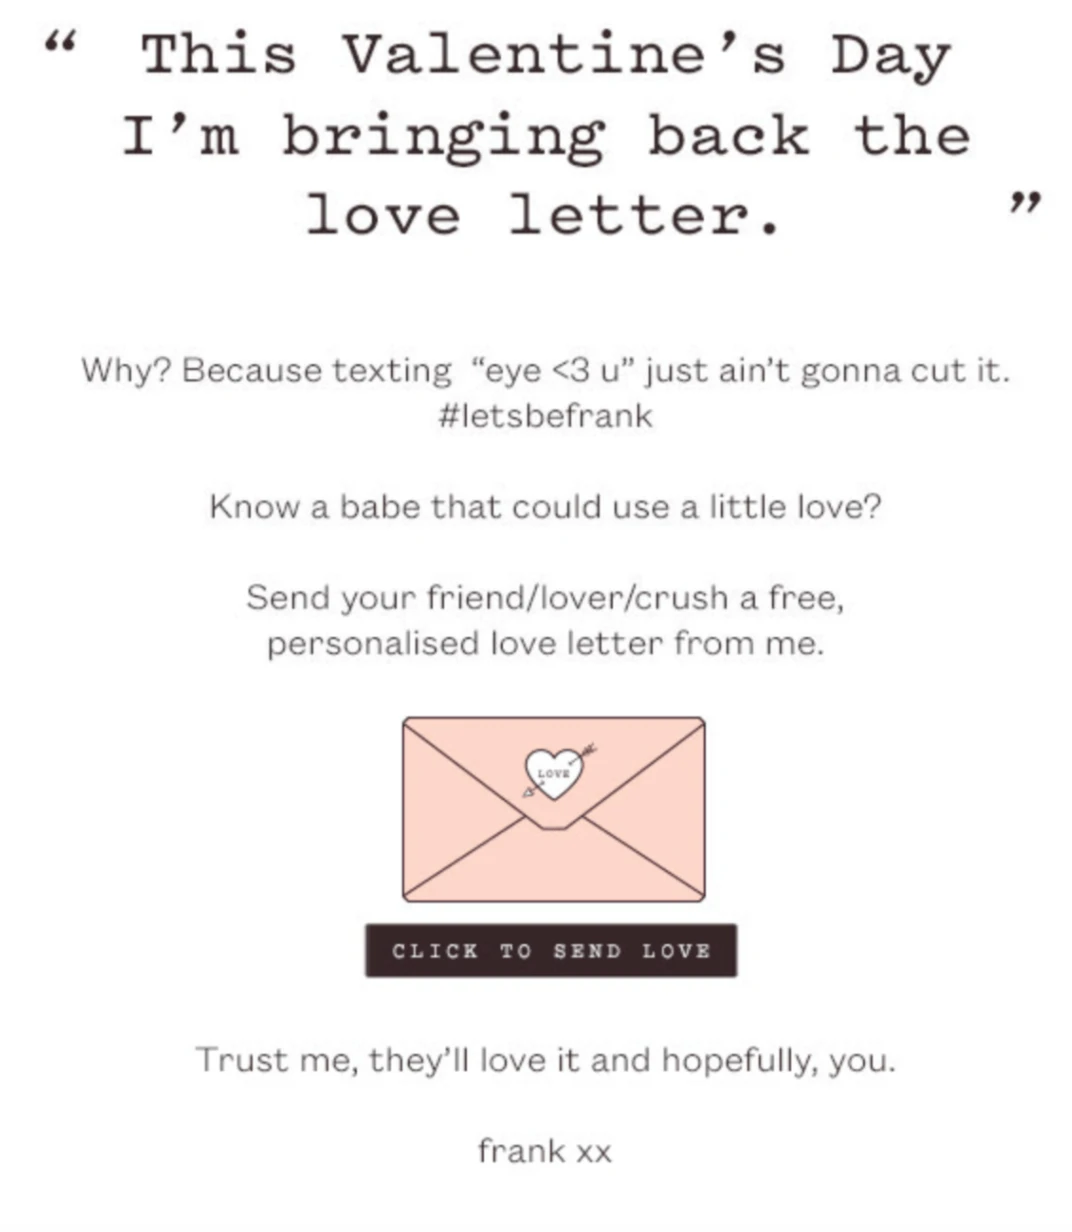 Valentine’s Day emails with a twist